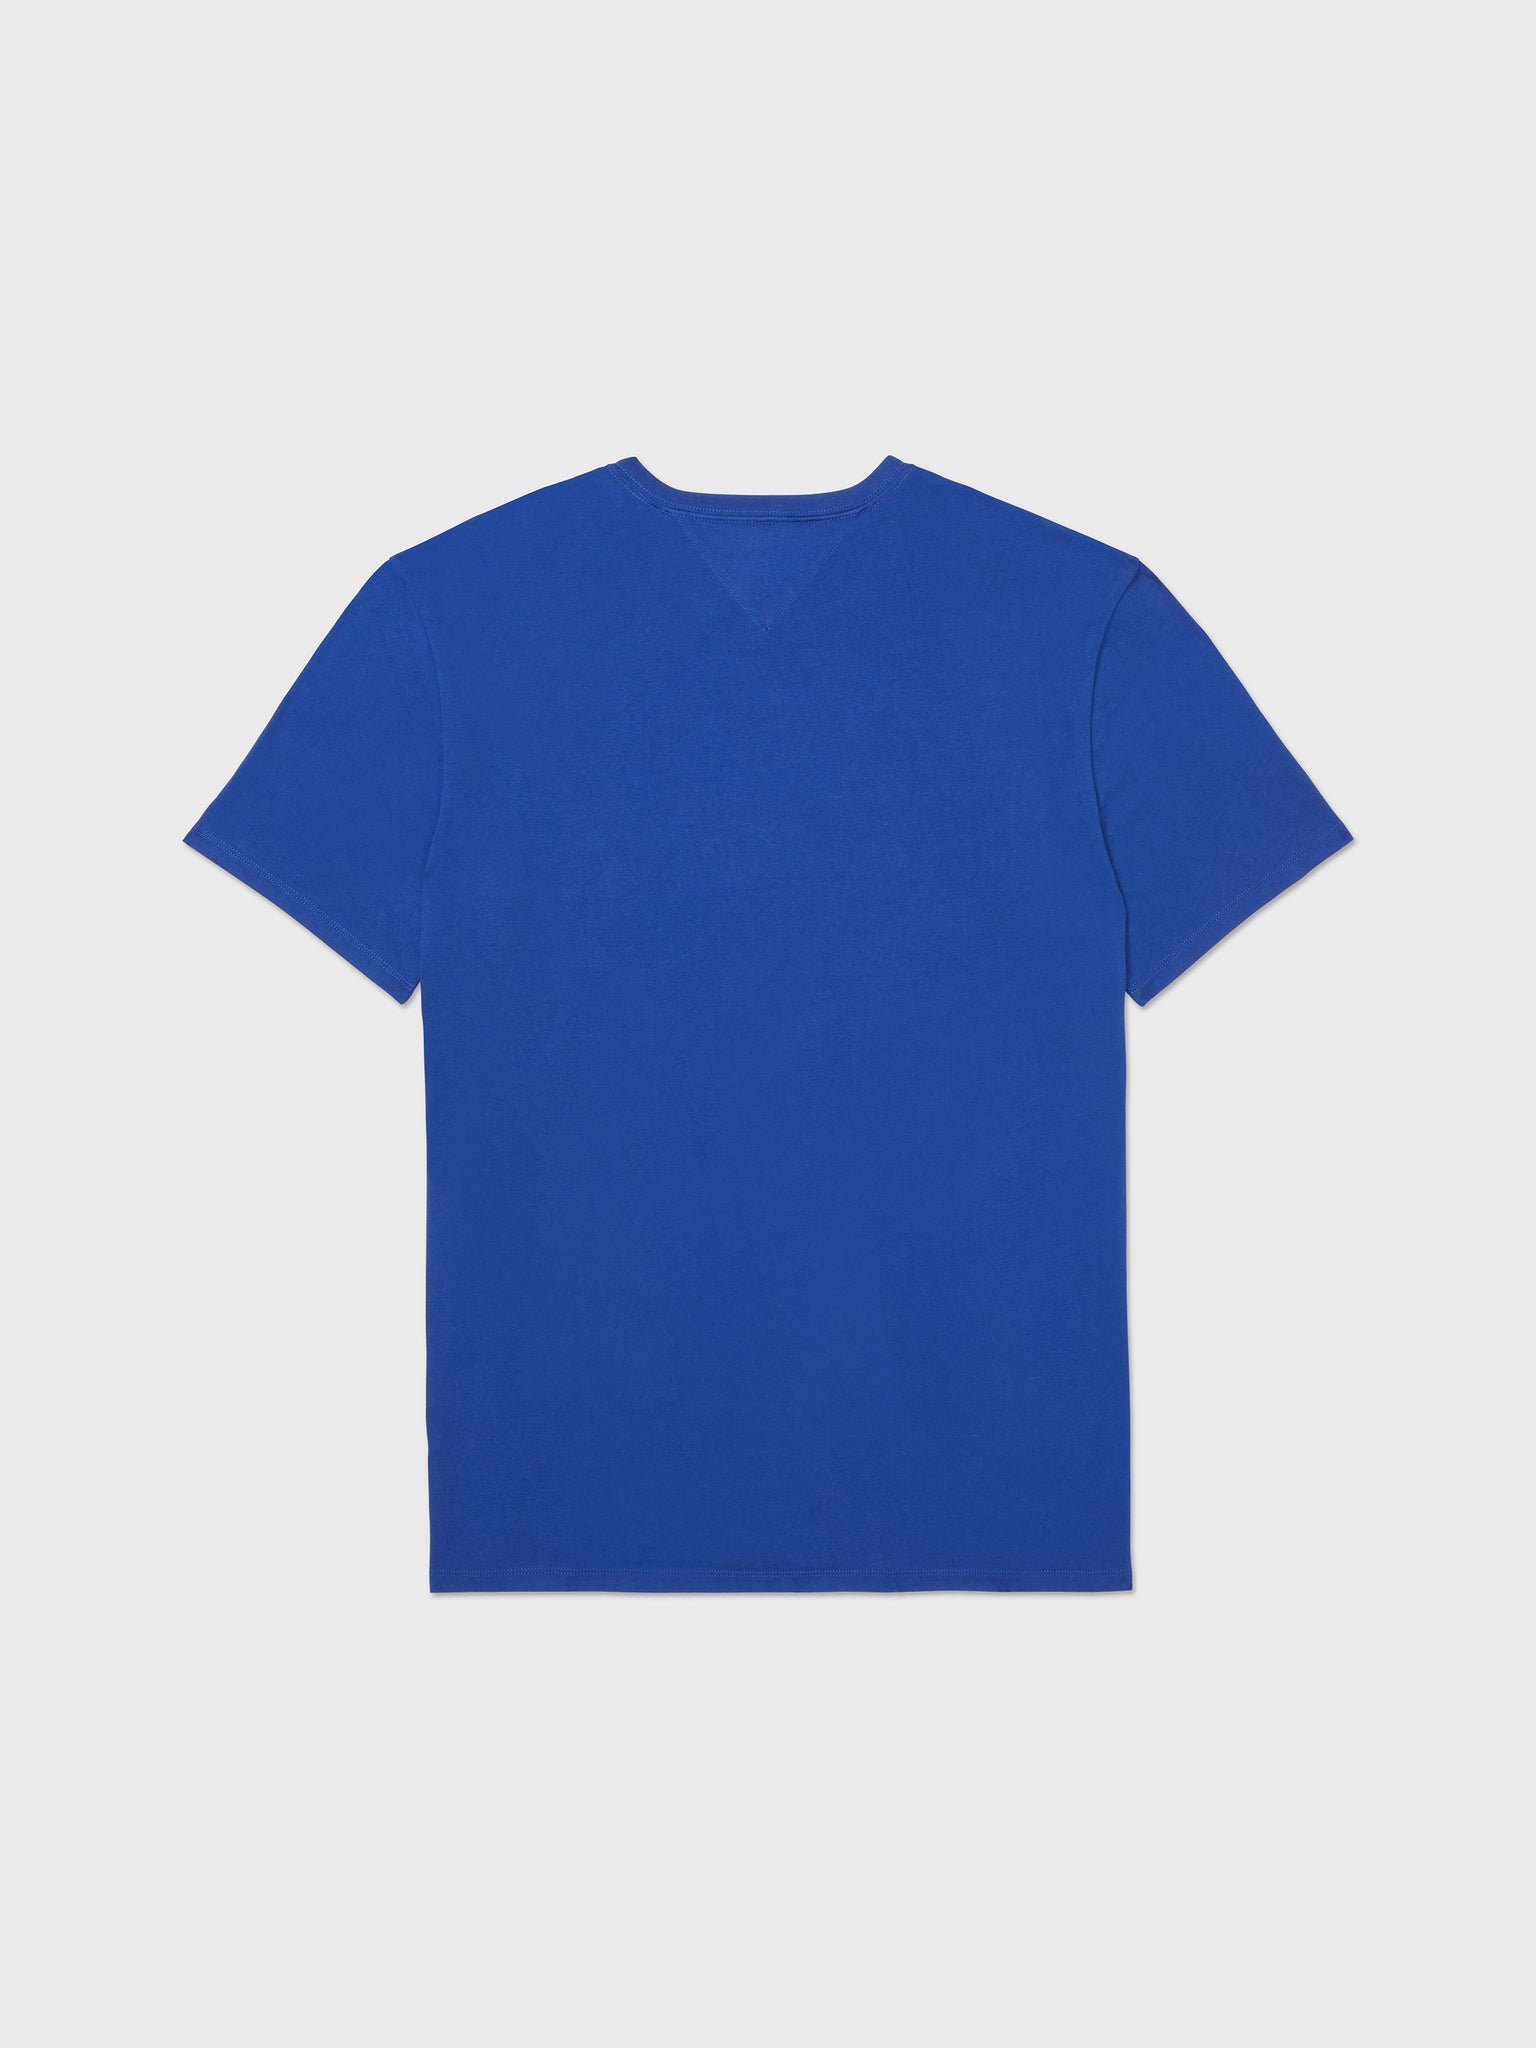 Founders Tee (Mens) - Midnight Blue